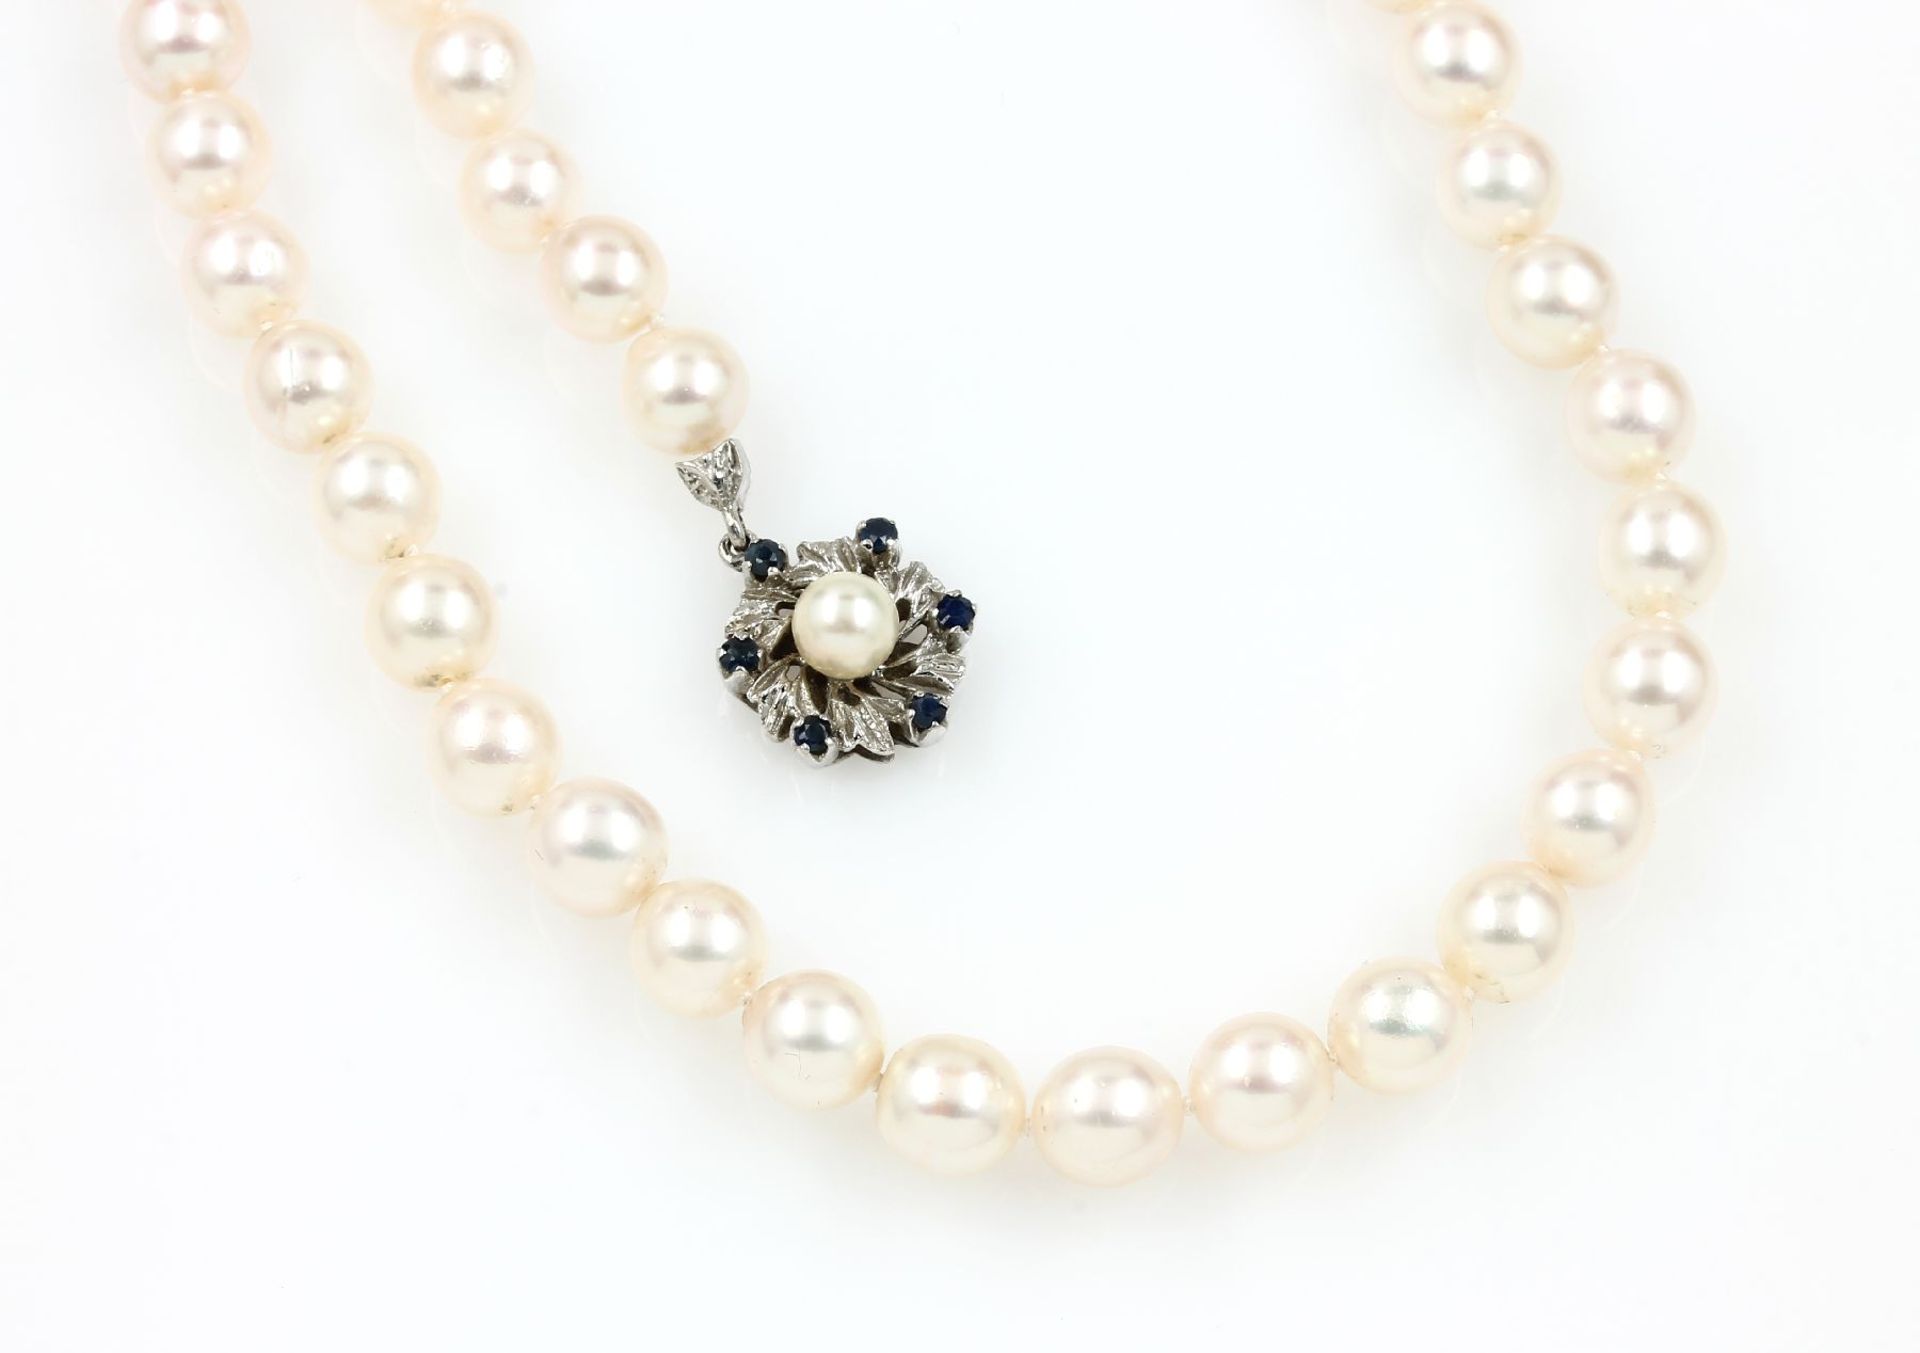 Necklace with Mikimoto cultured pearls , creamcoloured Mikimoto cultured pearls of finequality,